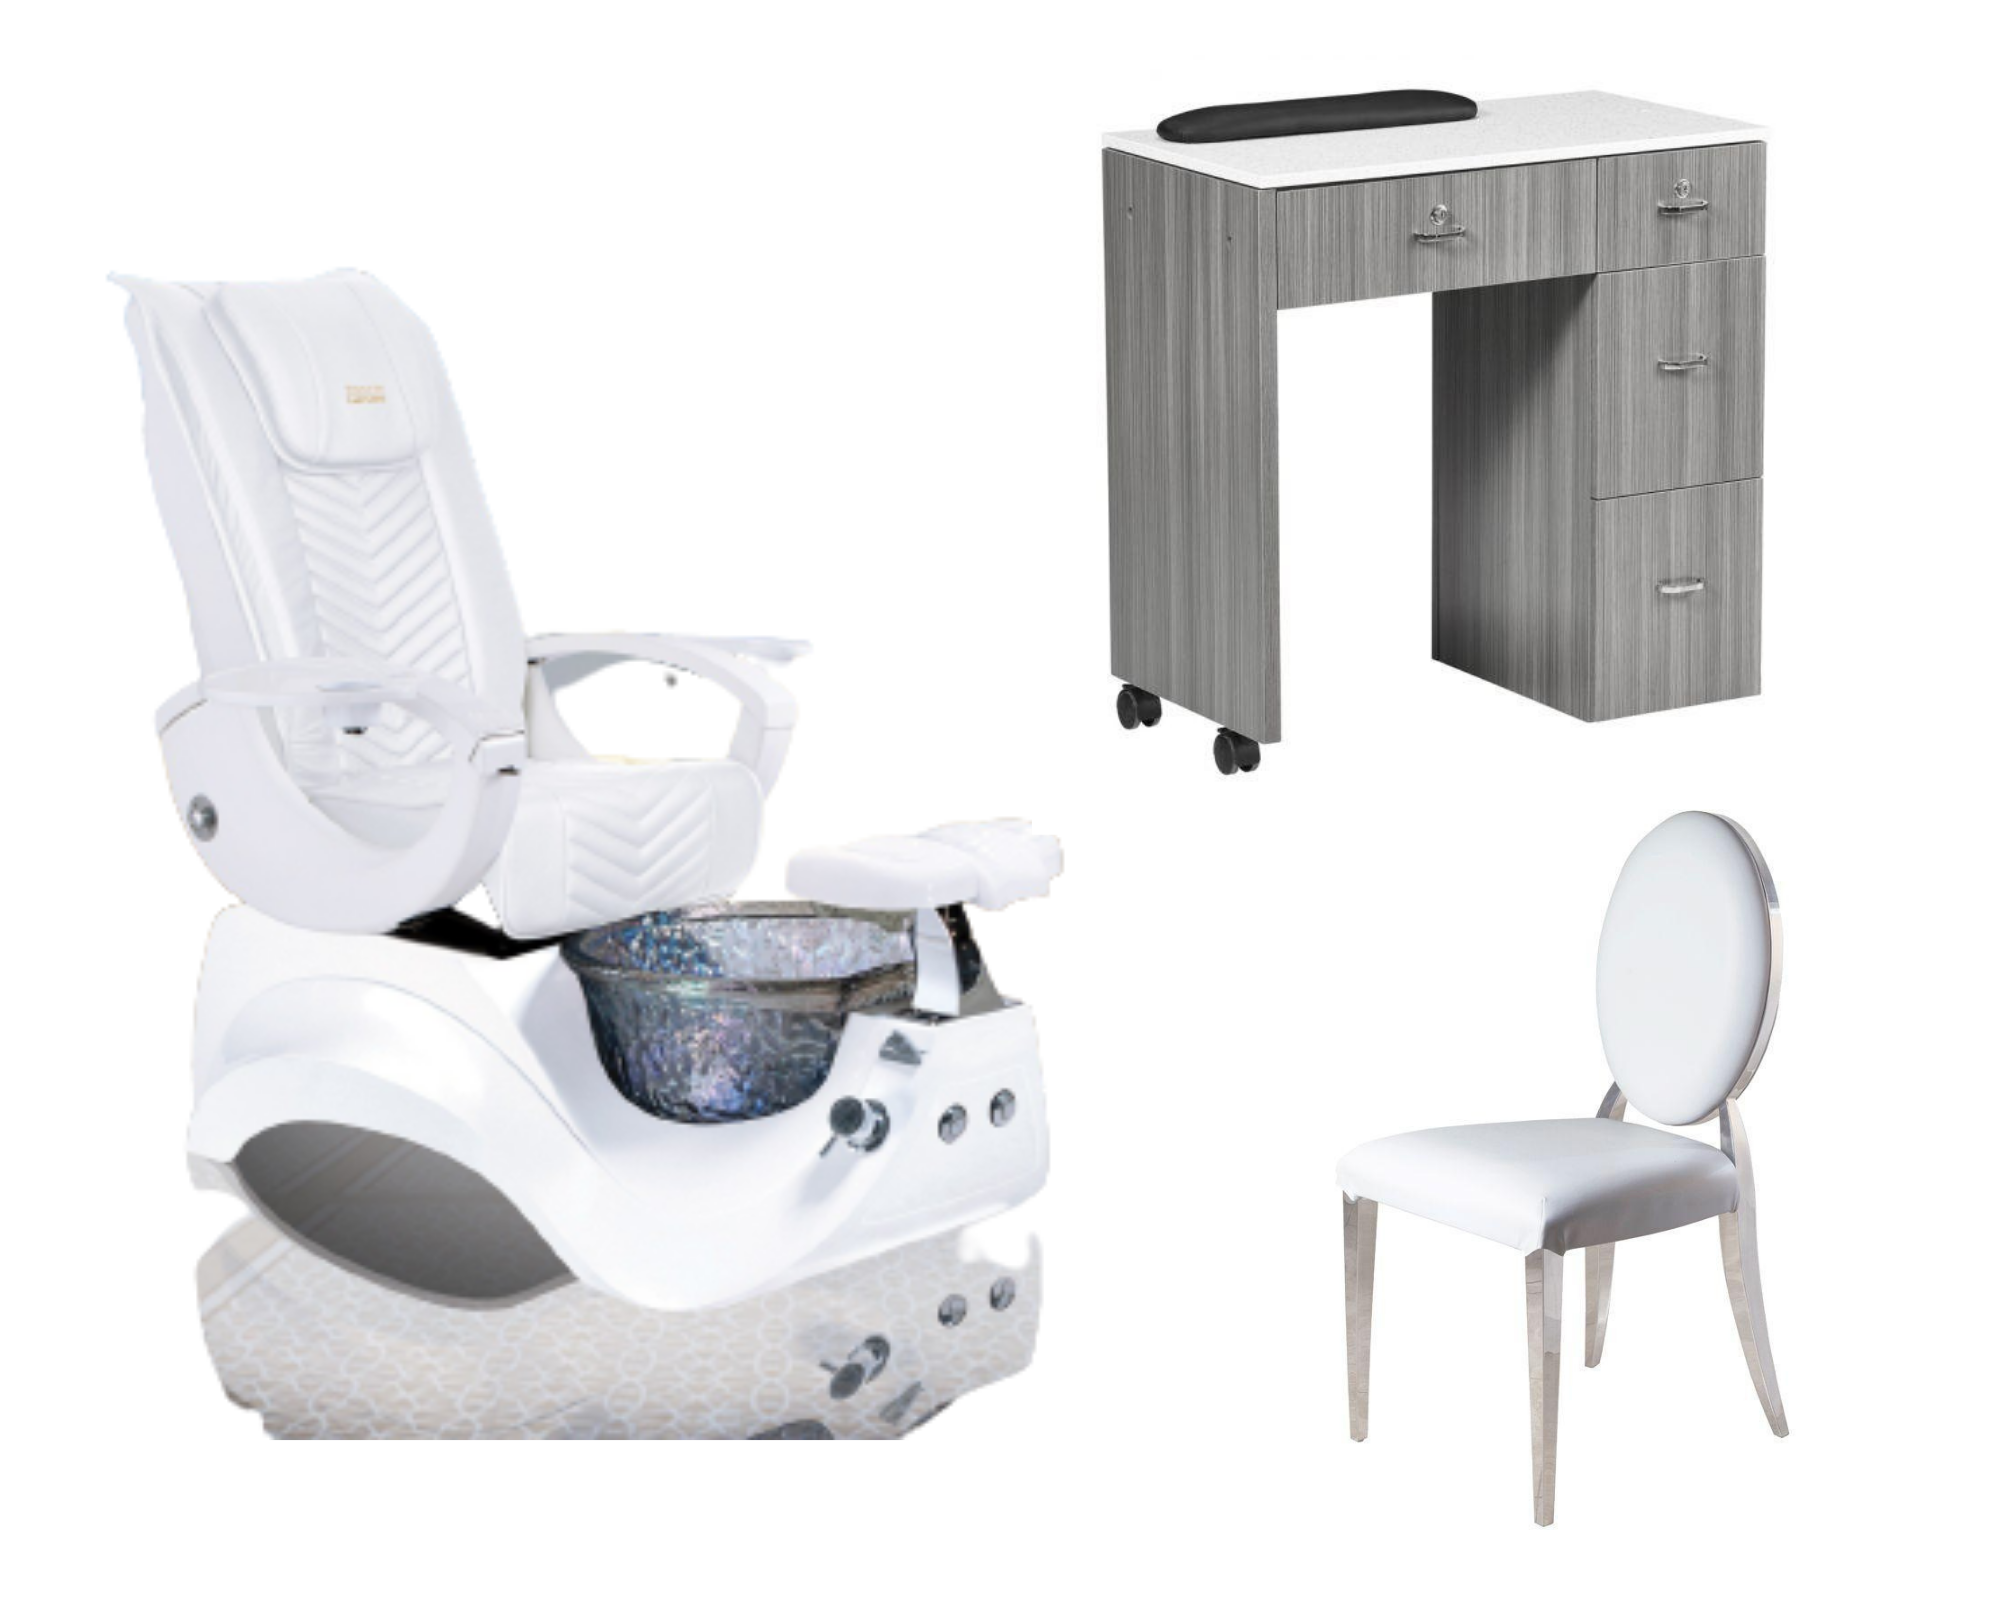 Whale Spa Valentino Lux - Manicure & Pedicure Package - Chairs That Give